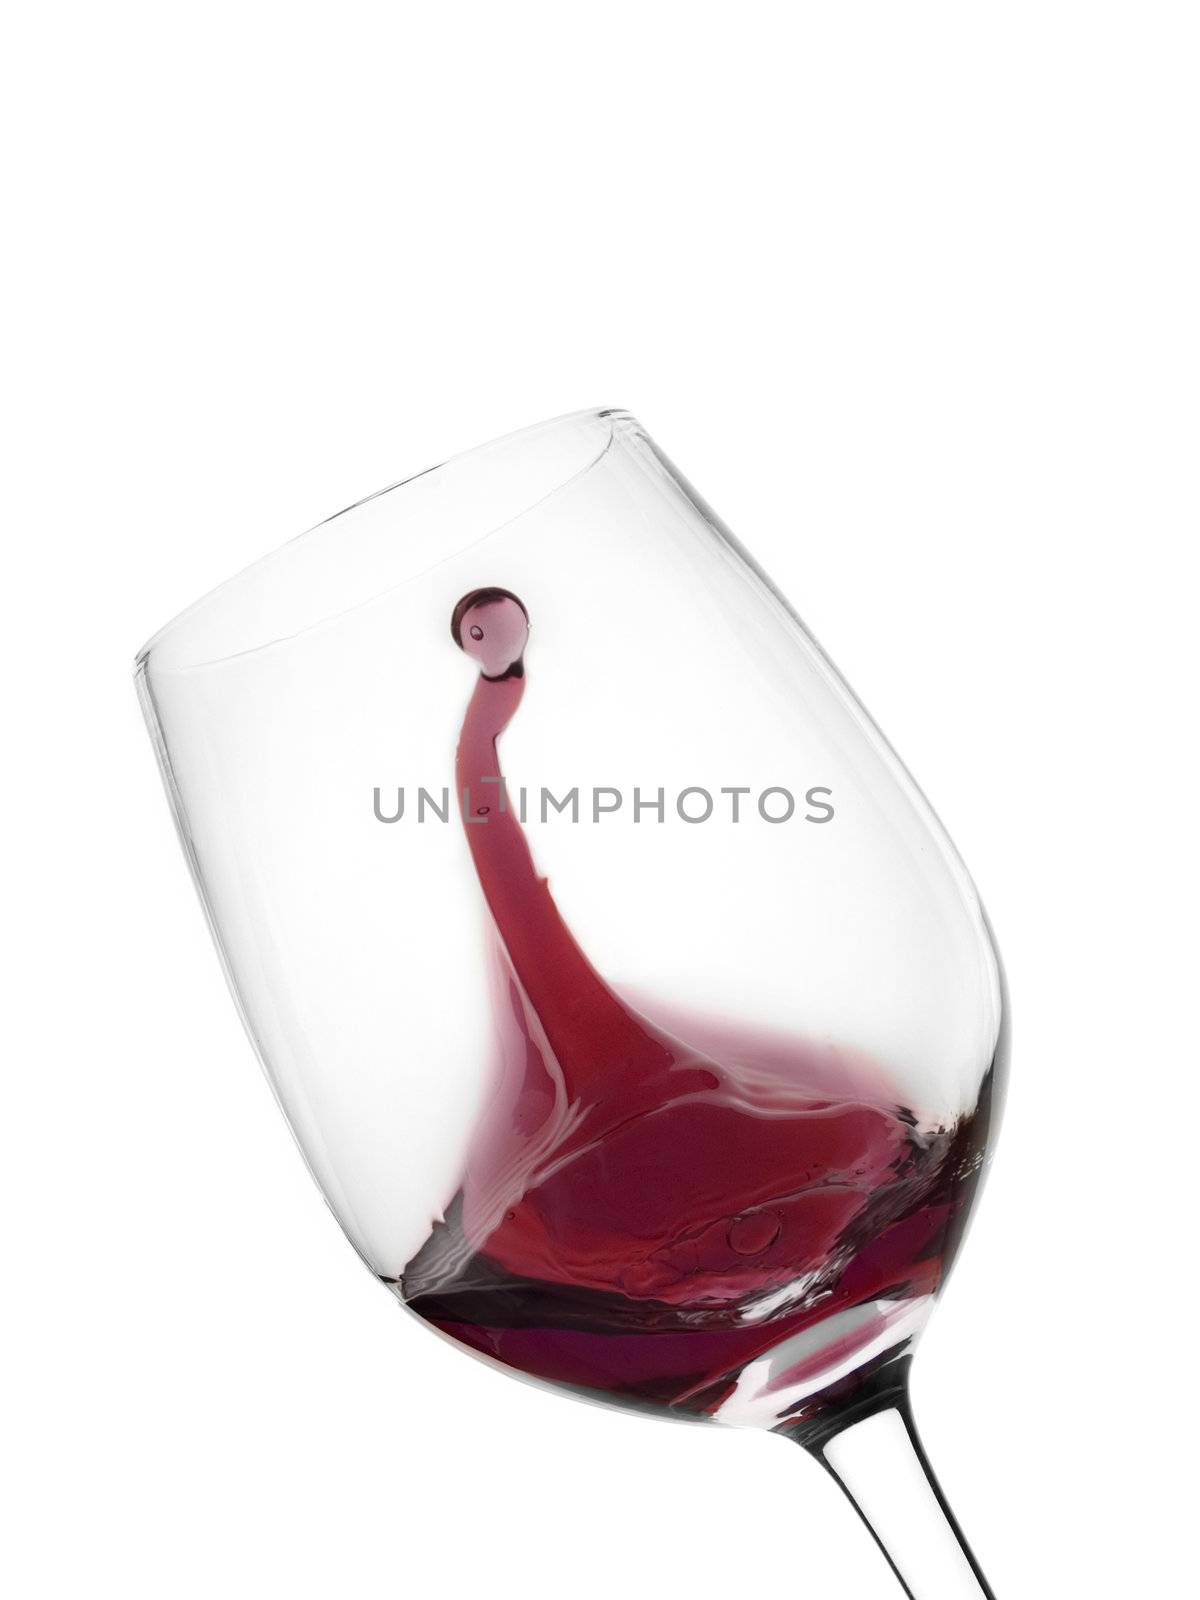 A malbec glass with red wine.